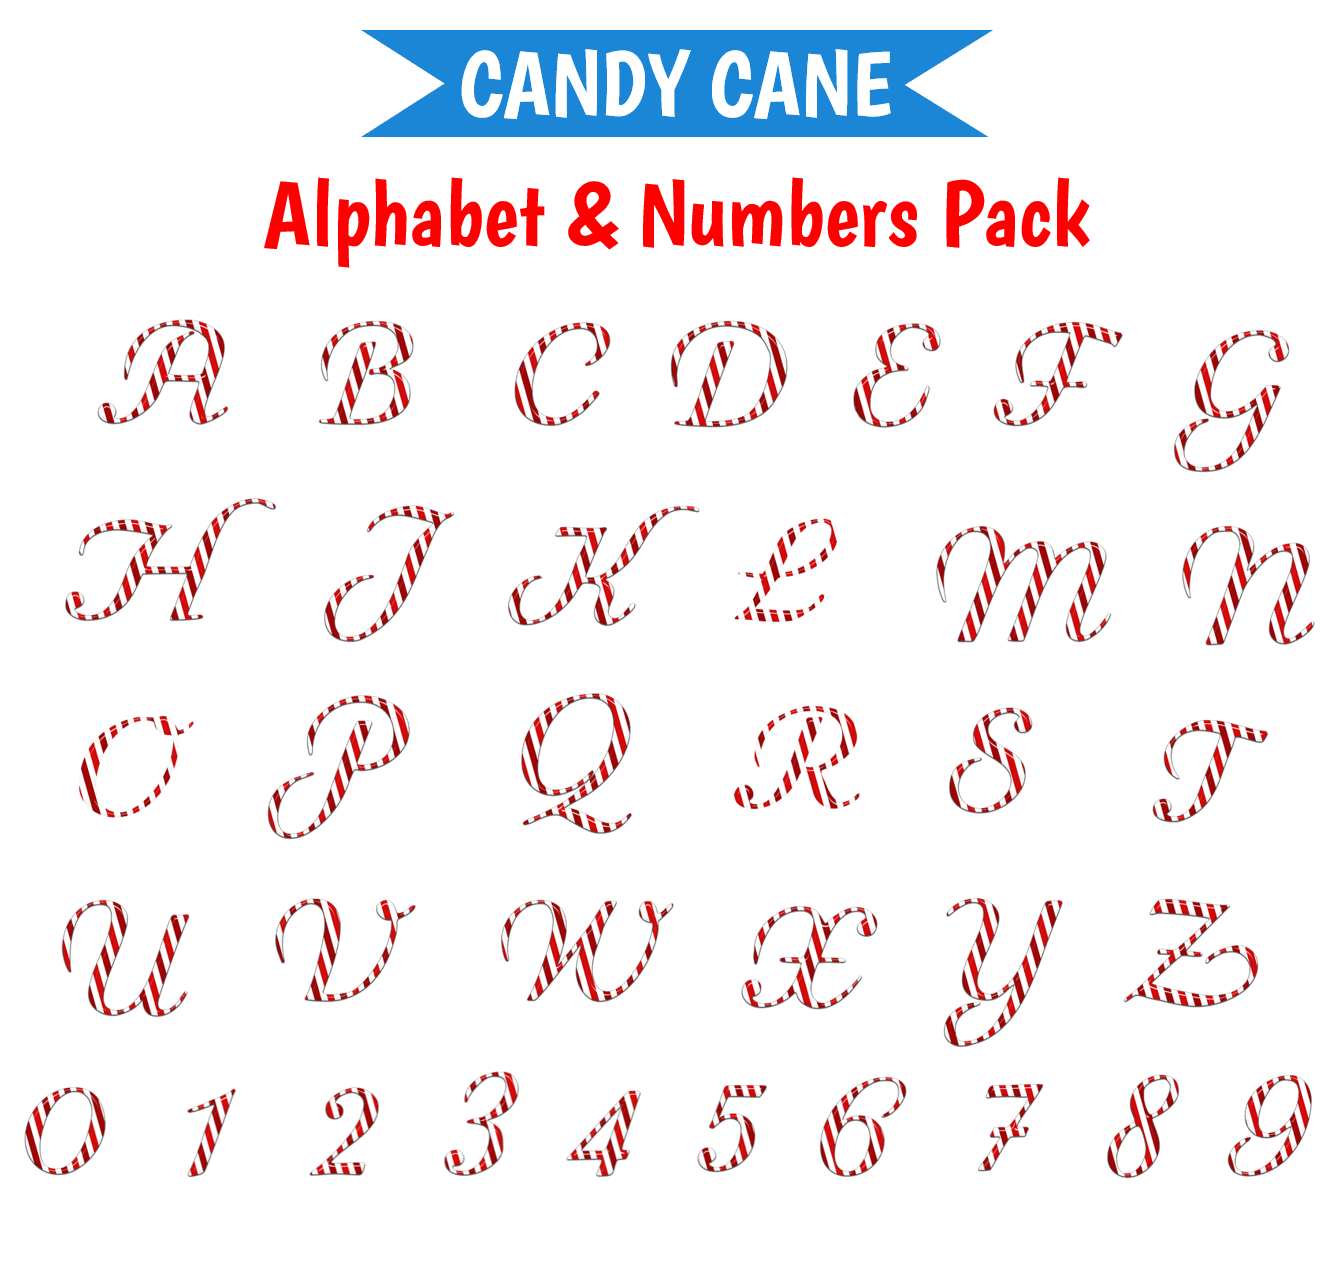 Candy Cane Alphabet & Number Images